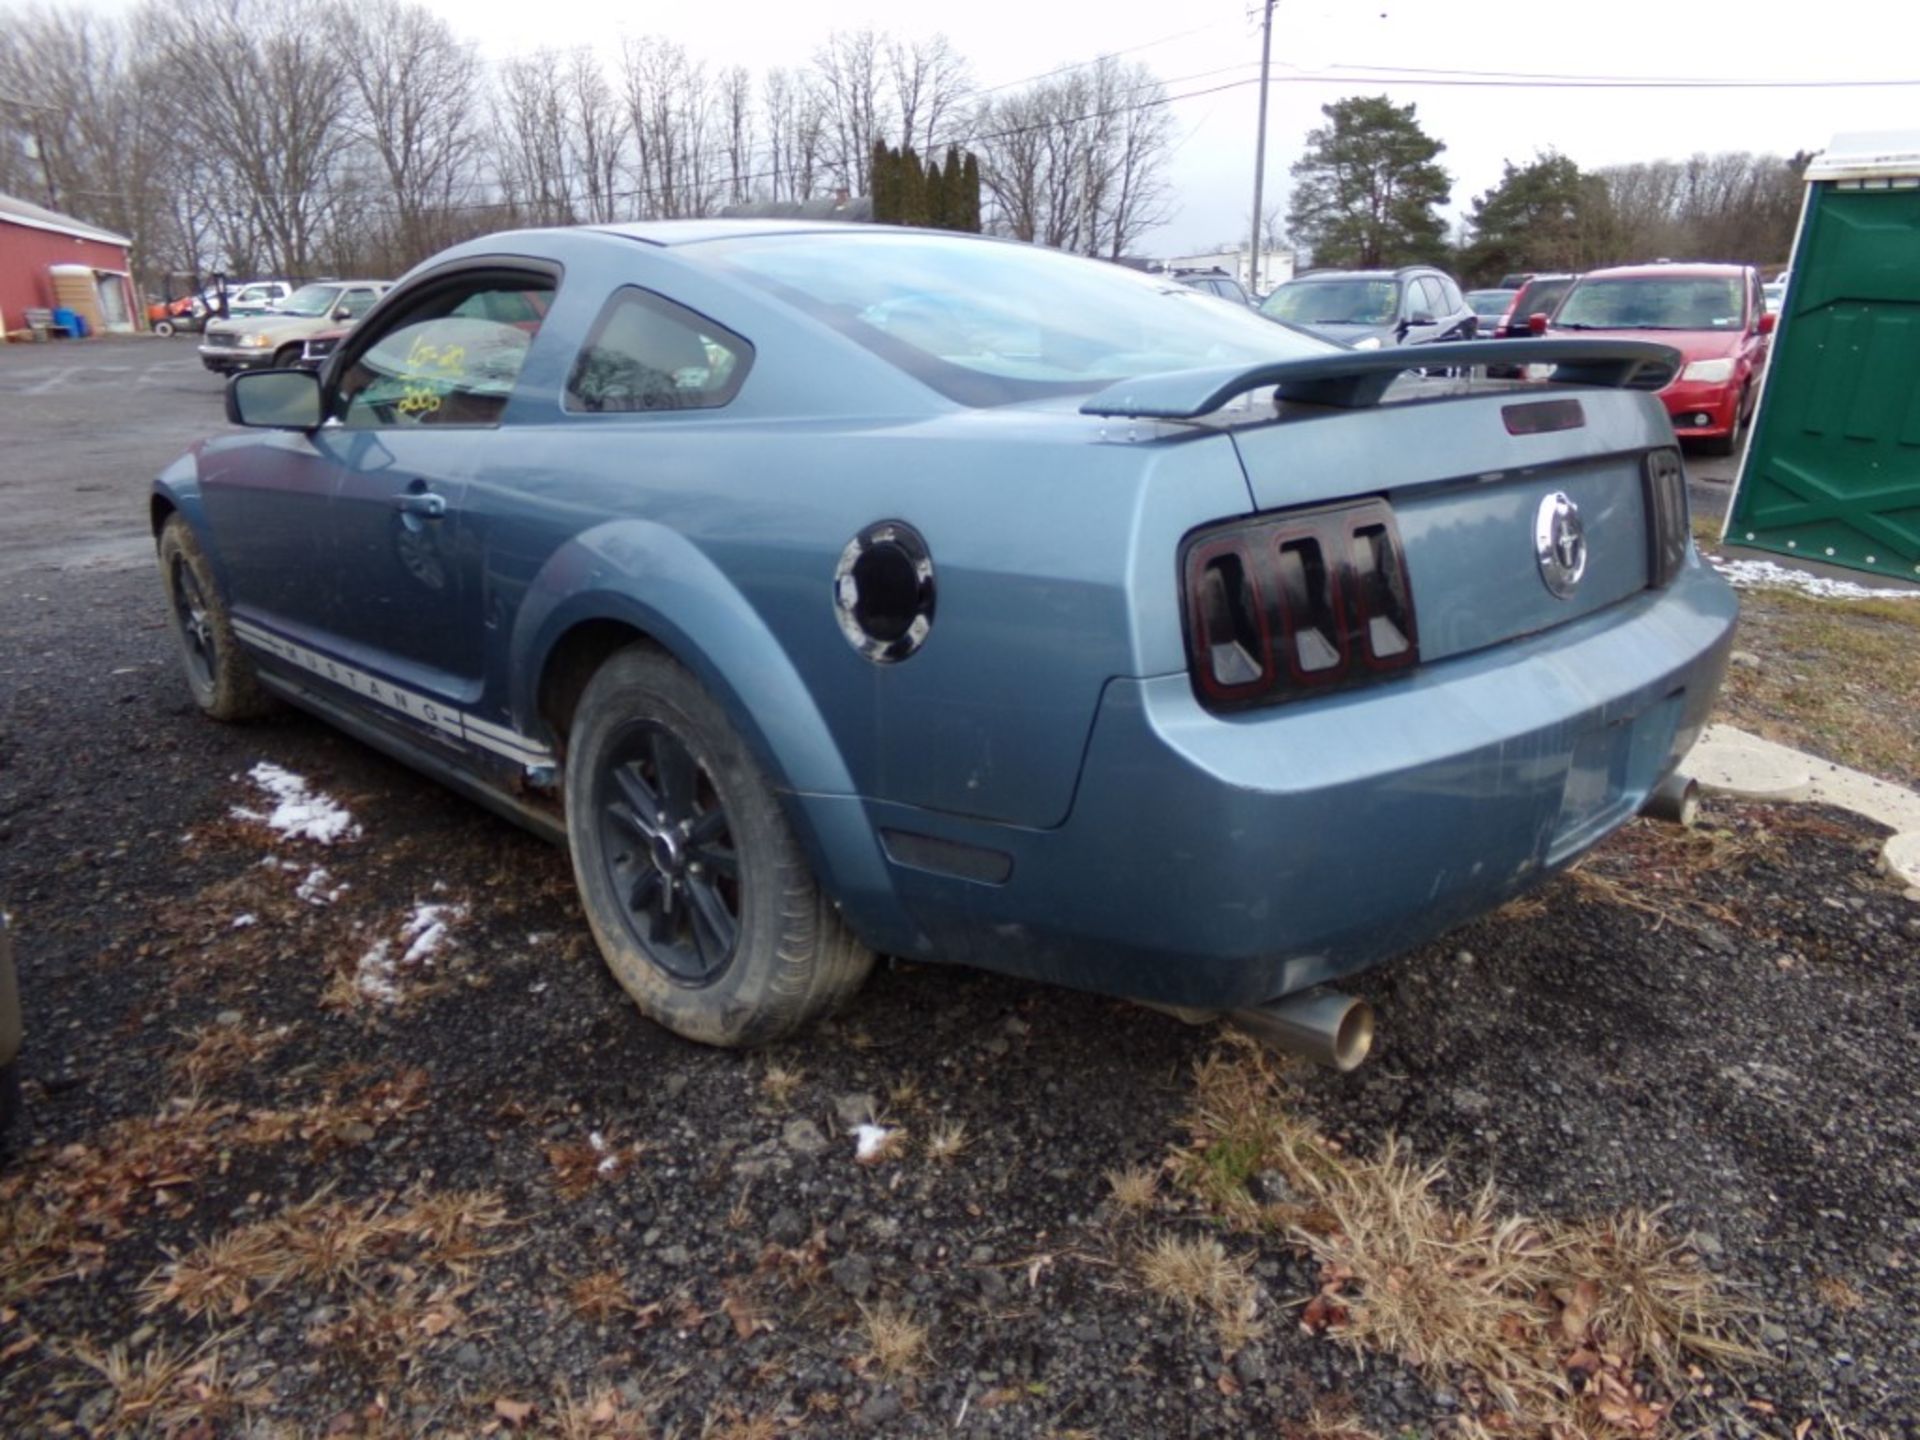 2006 Ford Mustang V6, Blue, 159,627 Mi., VIN#:1ZVFT80N965225795 - OPEN TO ALL BUYERS, RUNS & - Image 2 of 9